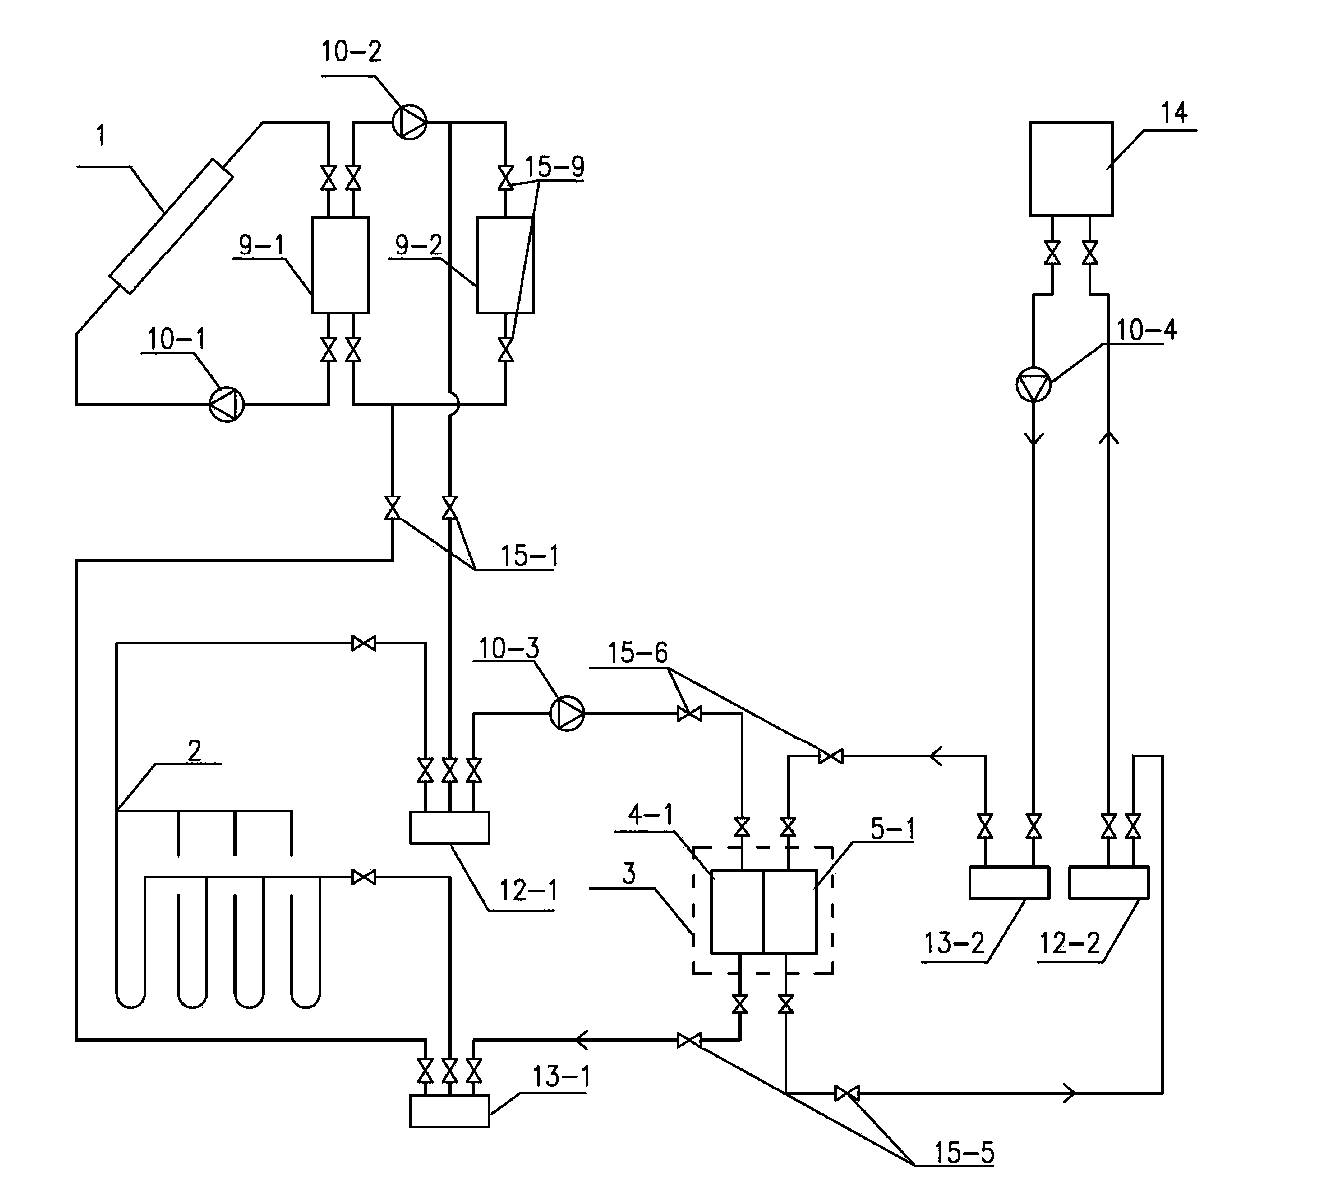 Heat exchange system in combined operation of solar energy and geothermal energy